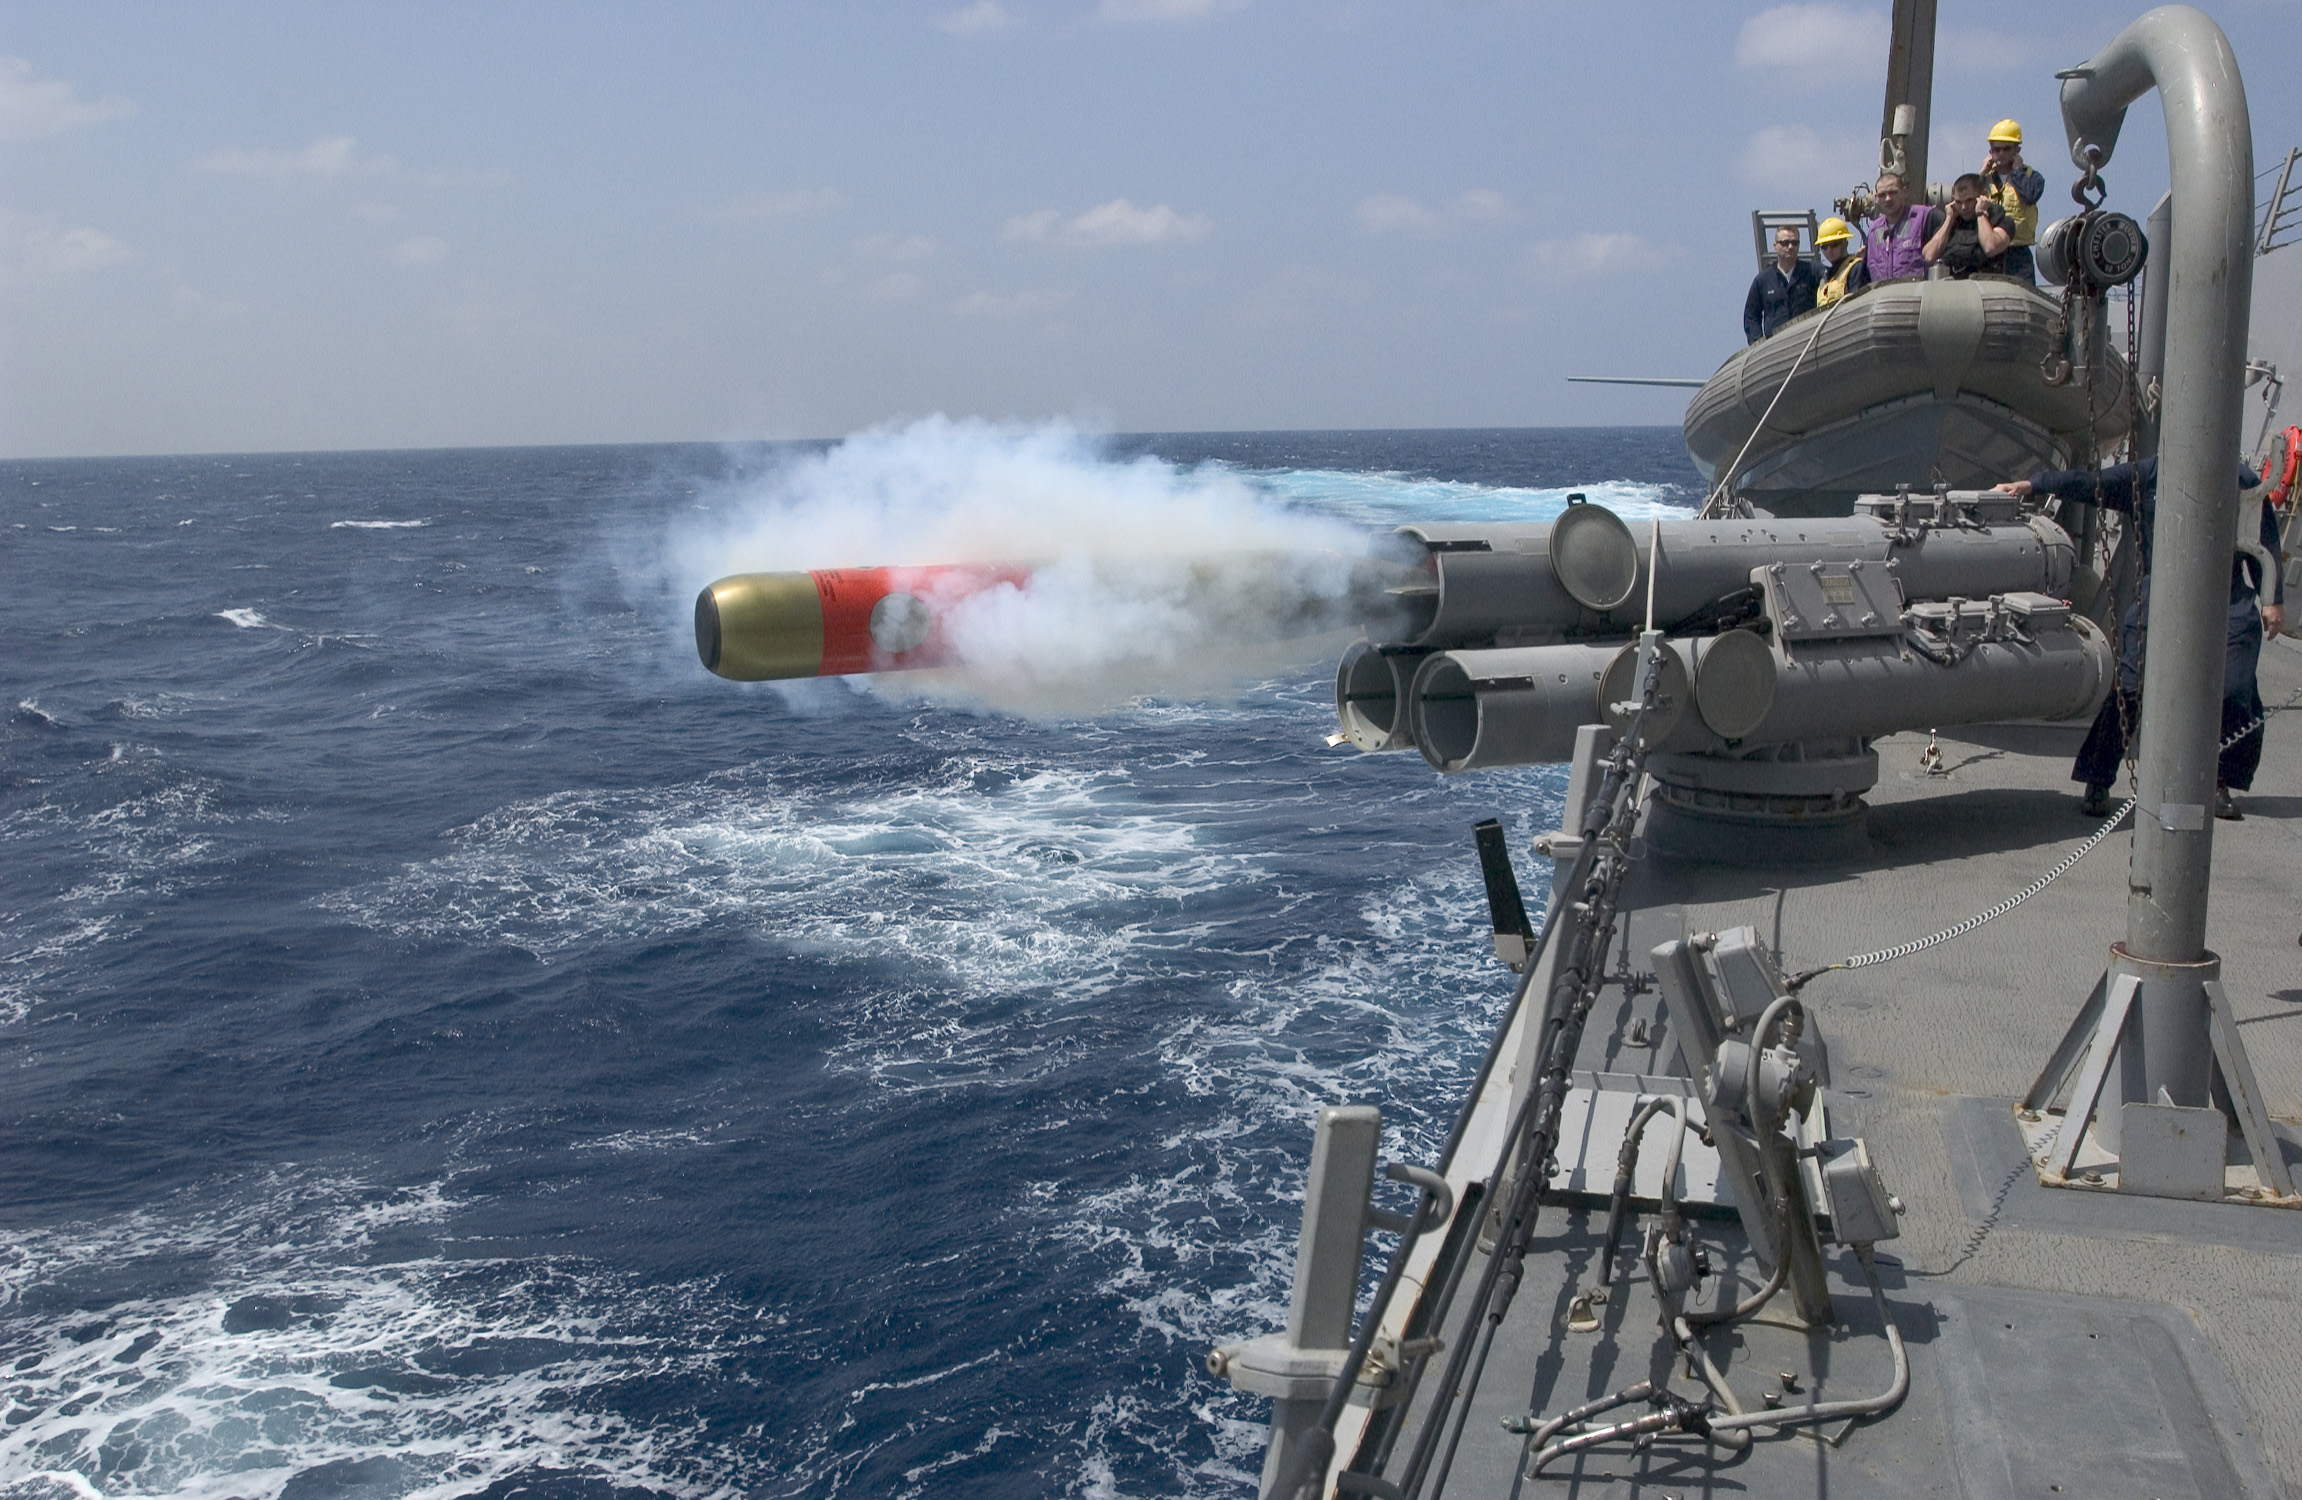 US_Navy_070412-N-9851B-007_A_MK-46_exercise_torpedo_is_launched_from_the_deck_of_Arleigh_Burke-class_guided-missile_destroyer_USS_Mustin_%28DDG_89%29_during_a_torpedo_launch_exercise.jpg